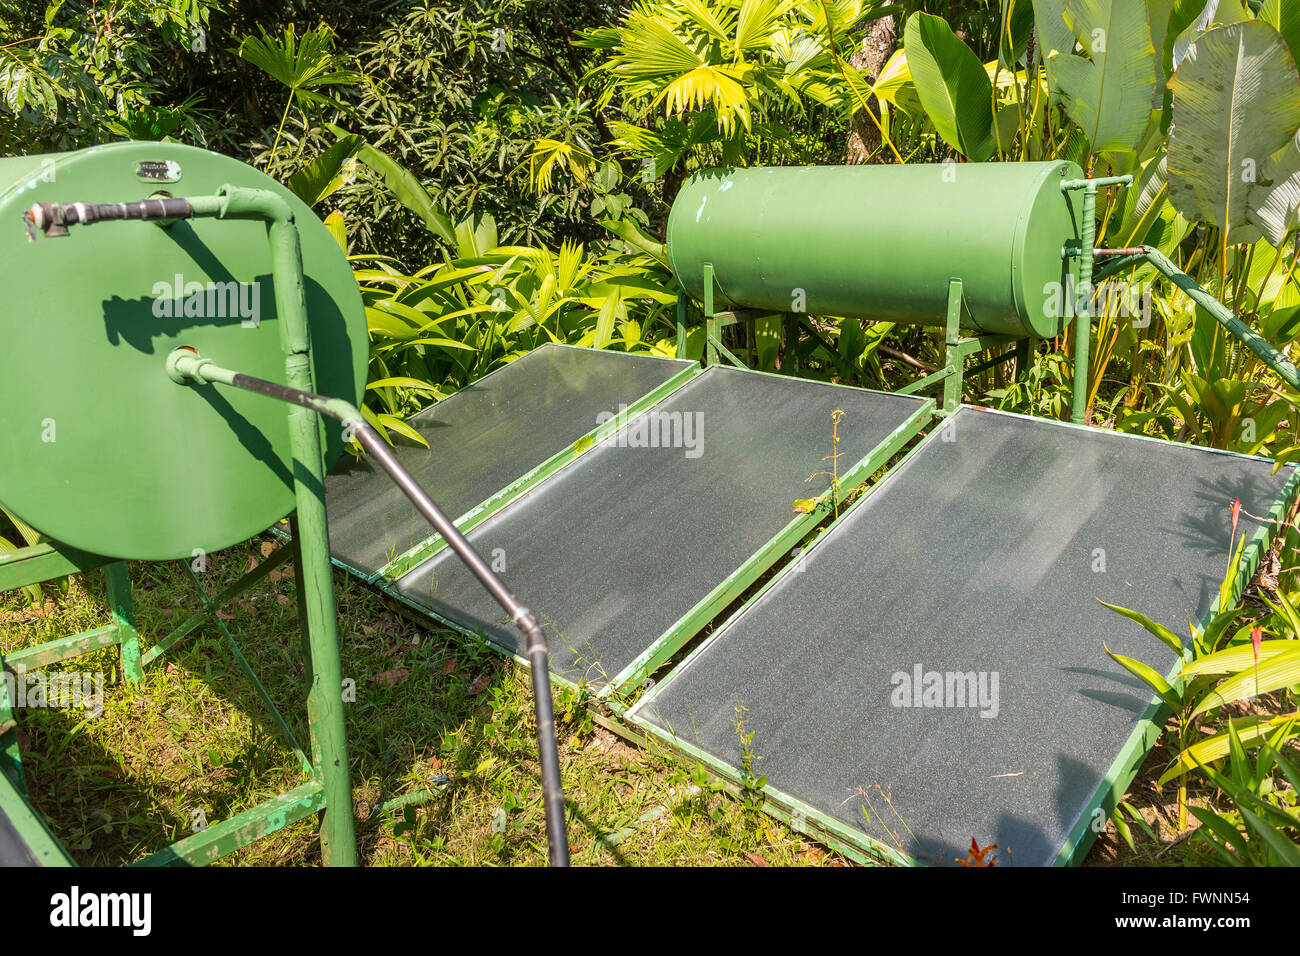 OSA PENINSULA, COSTA RICA - Solar hot water heater at eco-lodge, in the rain forest. Stock Photo